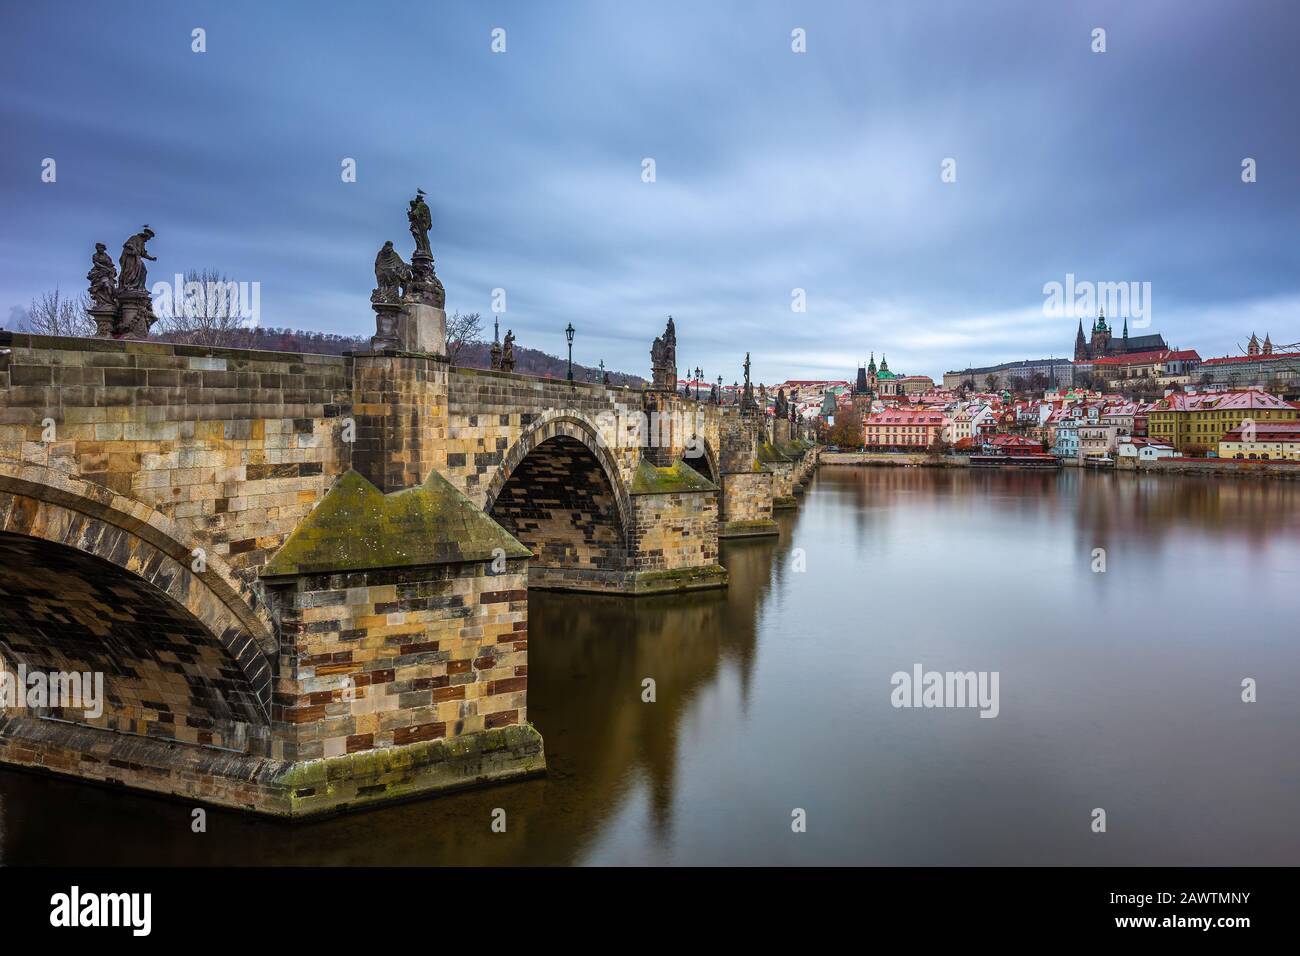 Prague, Czech Republic - The world famous Charles Bridge (Karluv most) with River Vltava and St. Vitus Cathedral on a cludy winter morning Stock Photo